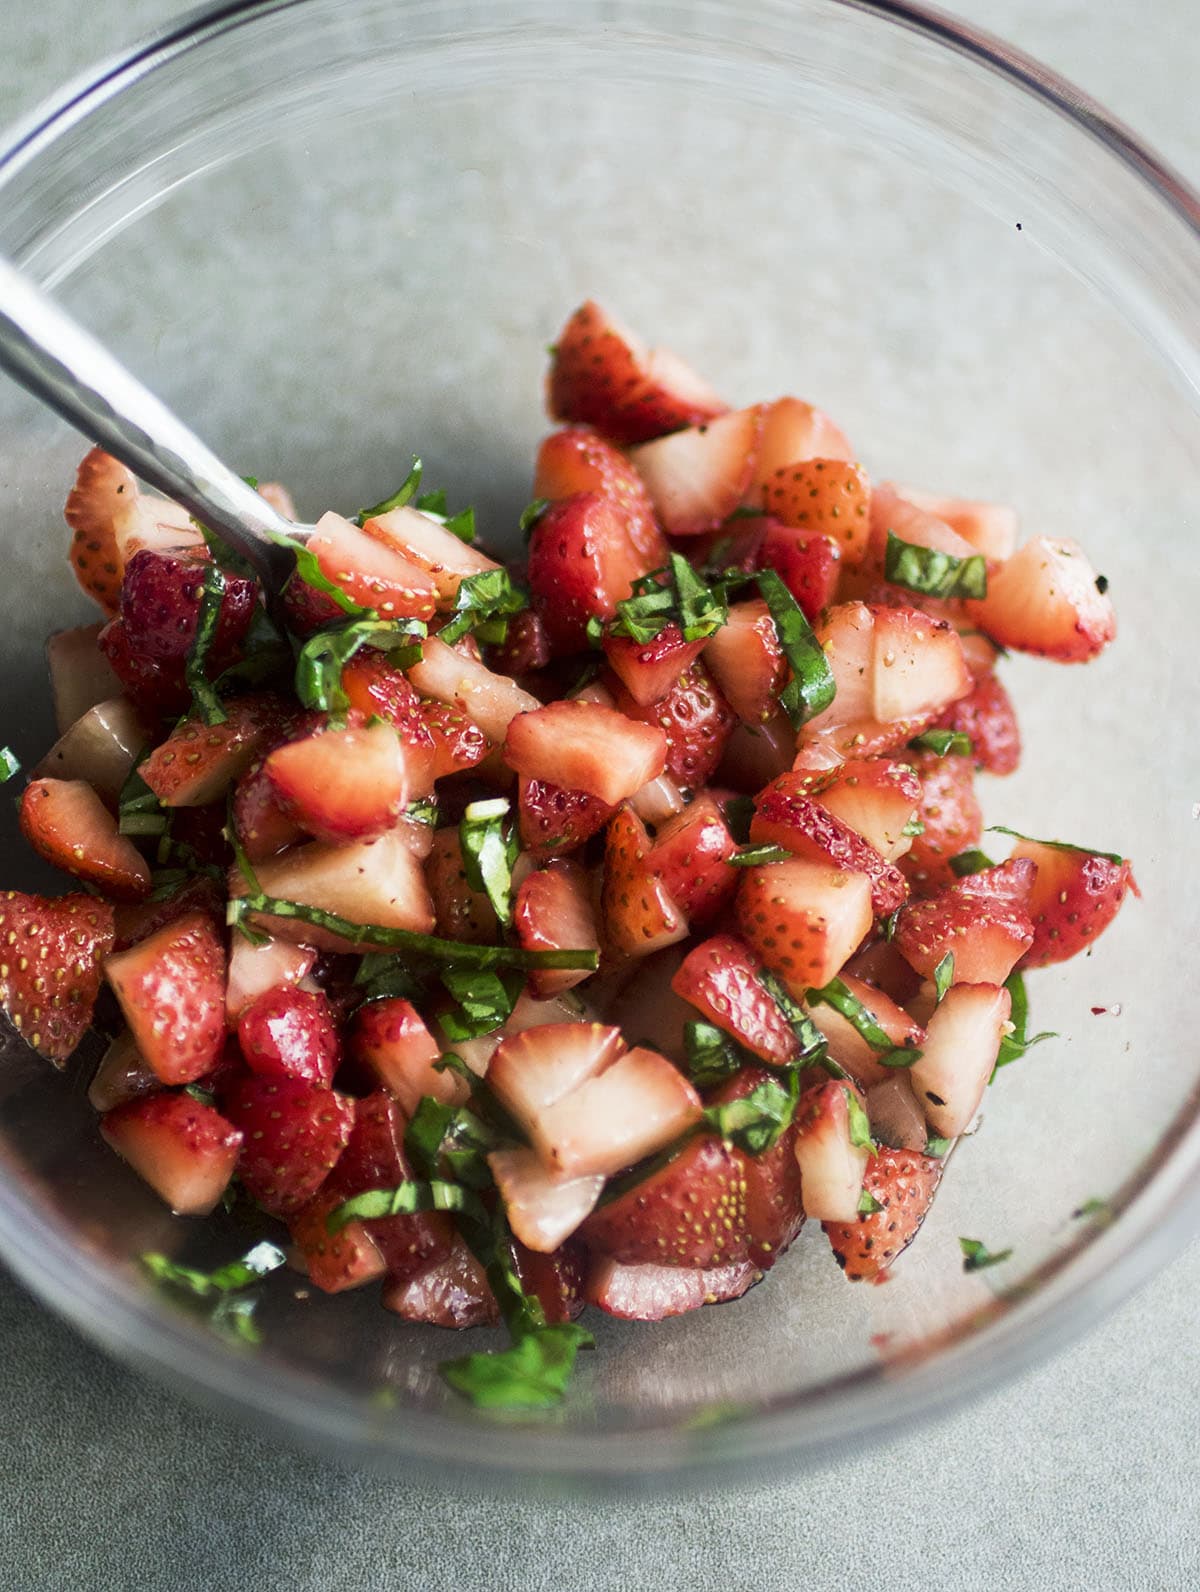 Diced strawberries and chopped basil in a glass mixing bowl.